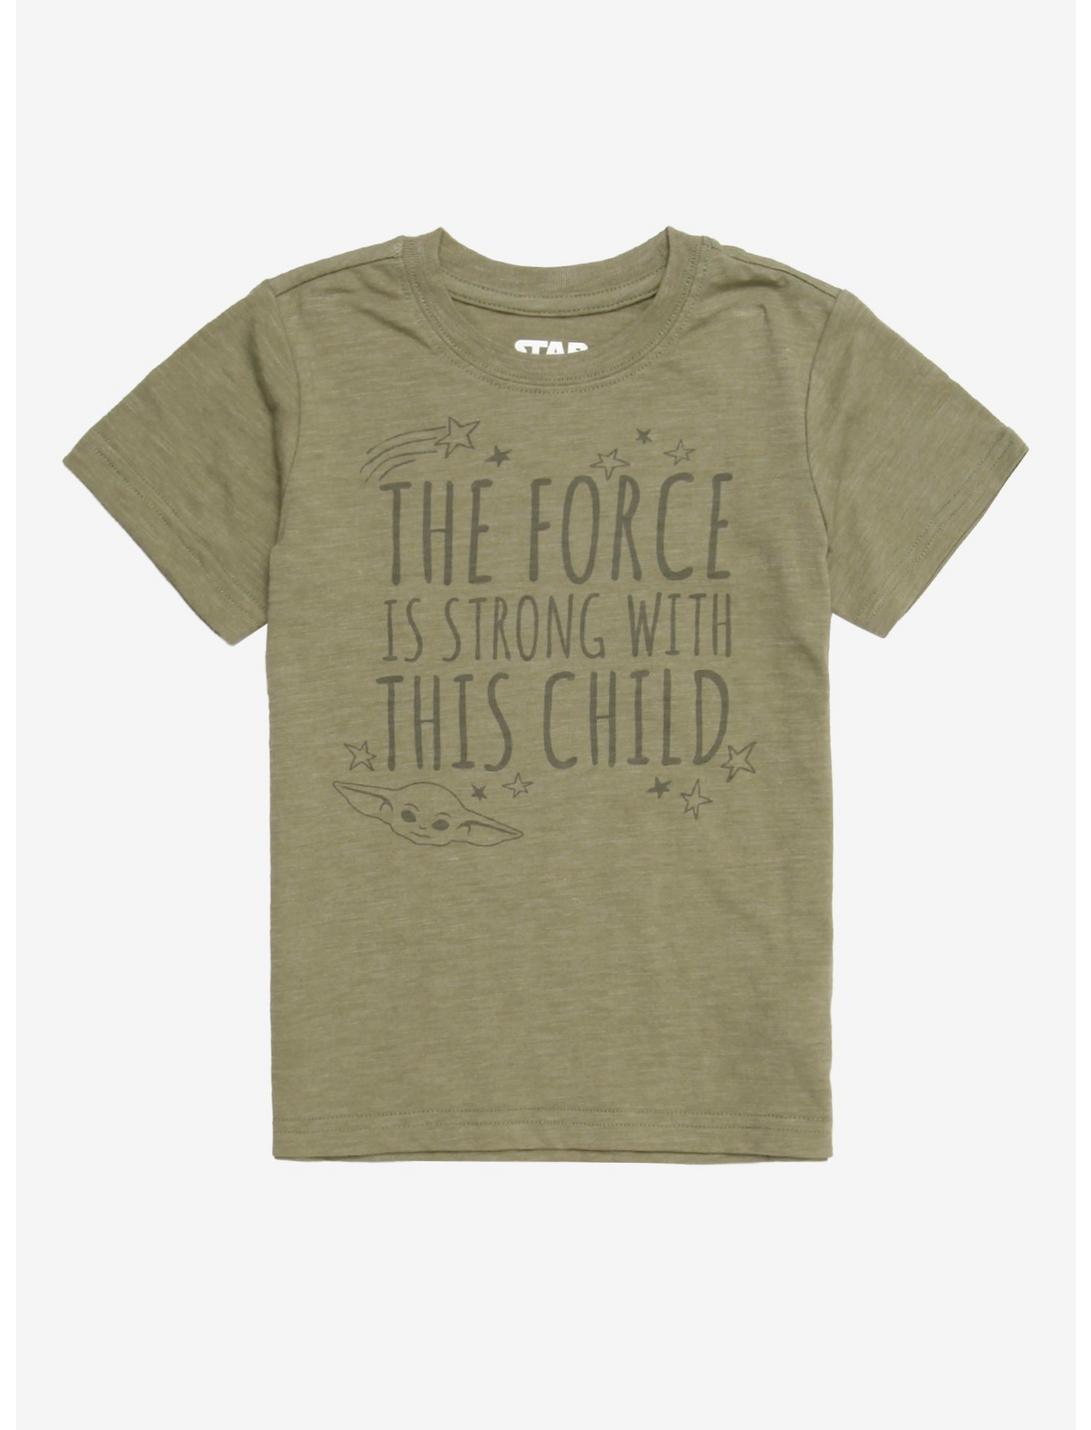 Star Wars Force Is Strong With This Child Toddler T-Shirt - BoxLunch Exclusive, BLACK, hi-res